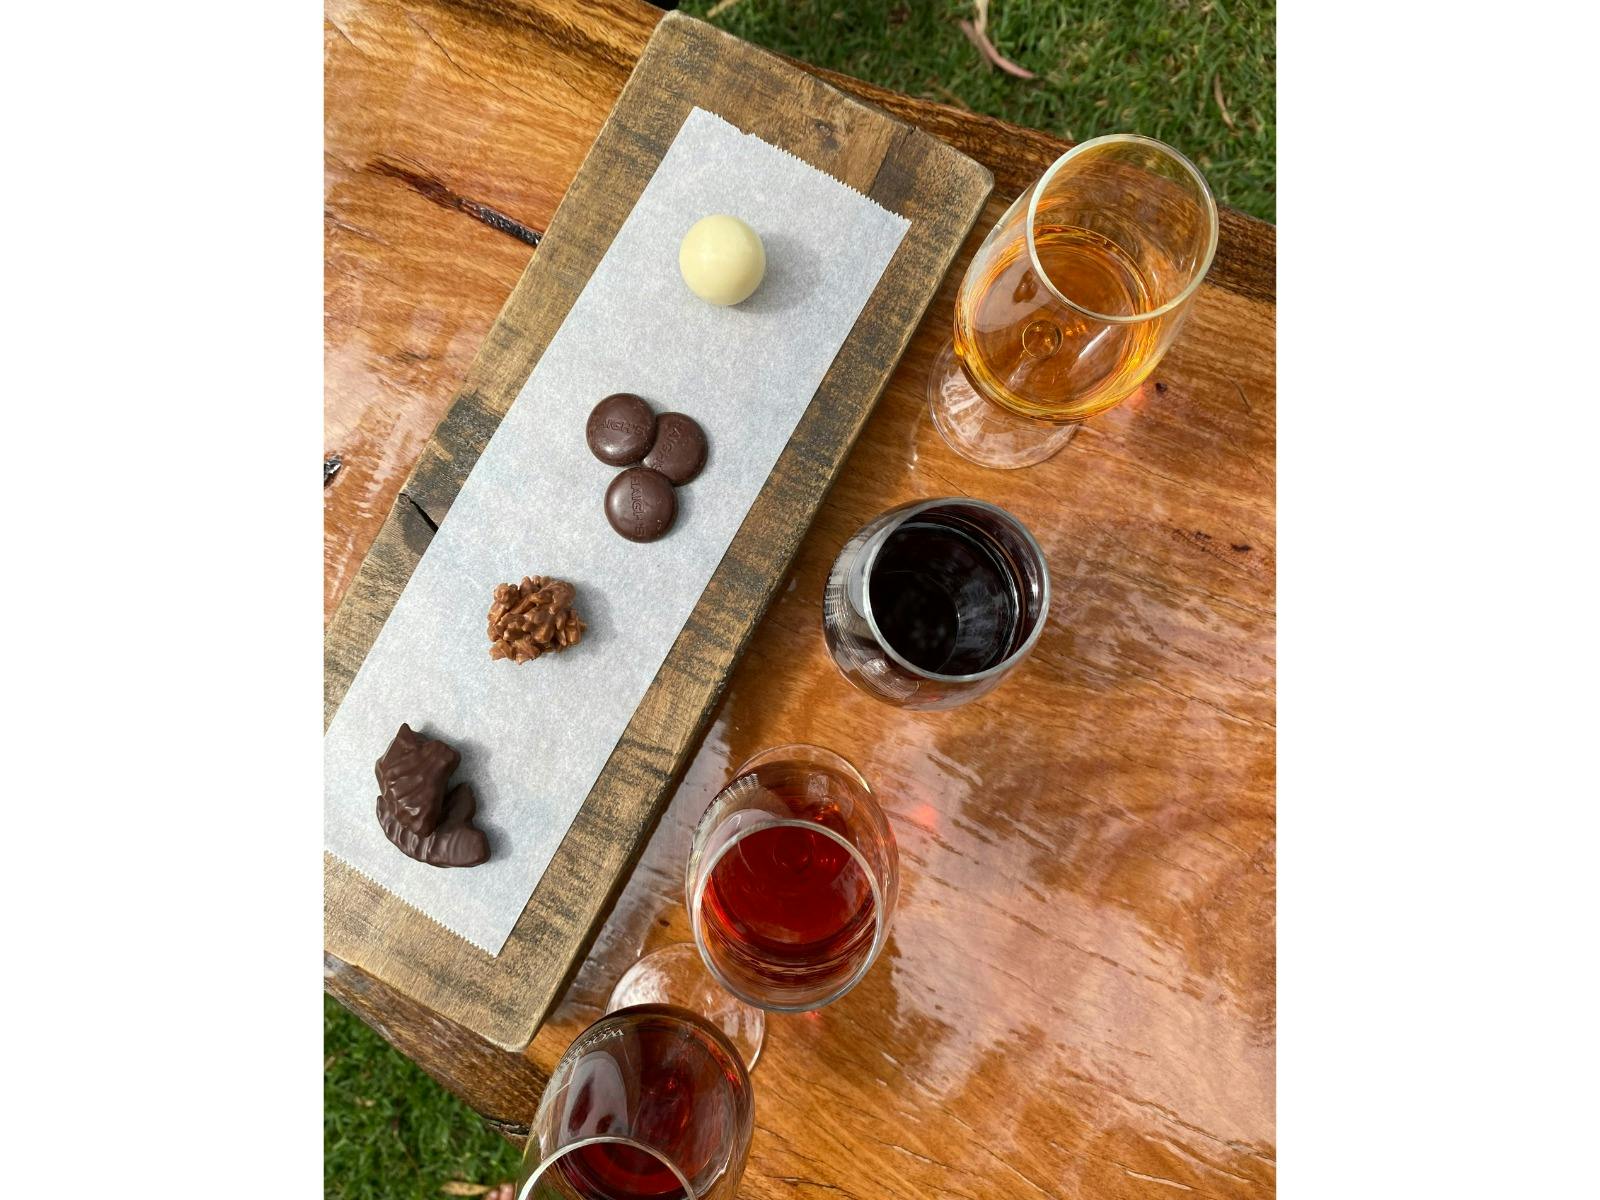 Fortified wine and chocolate